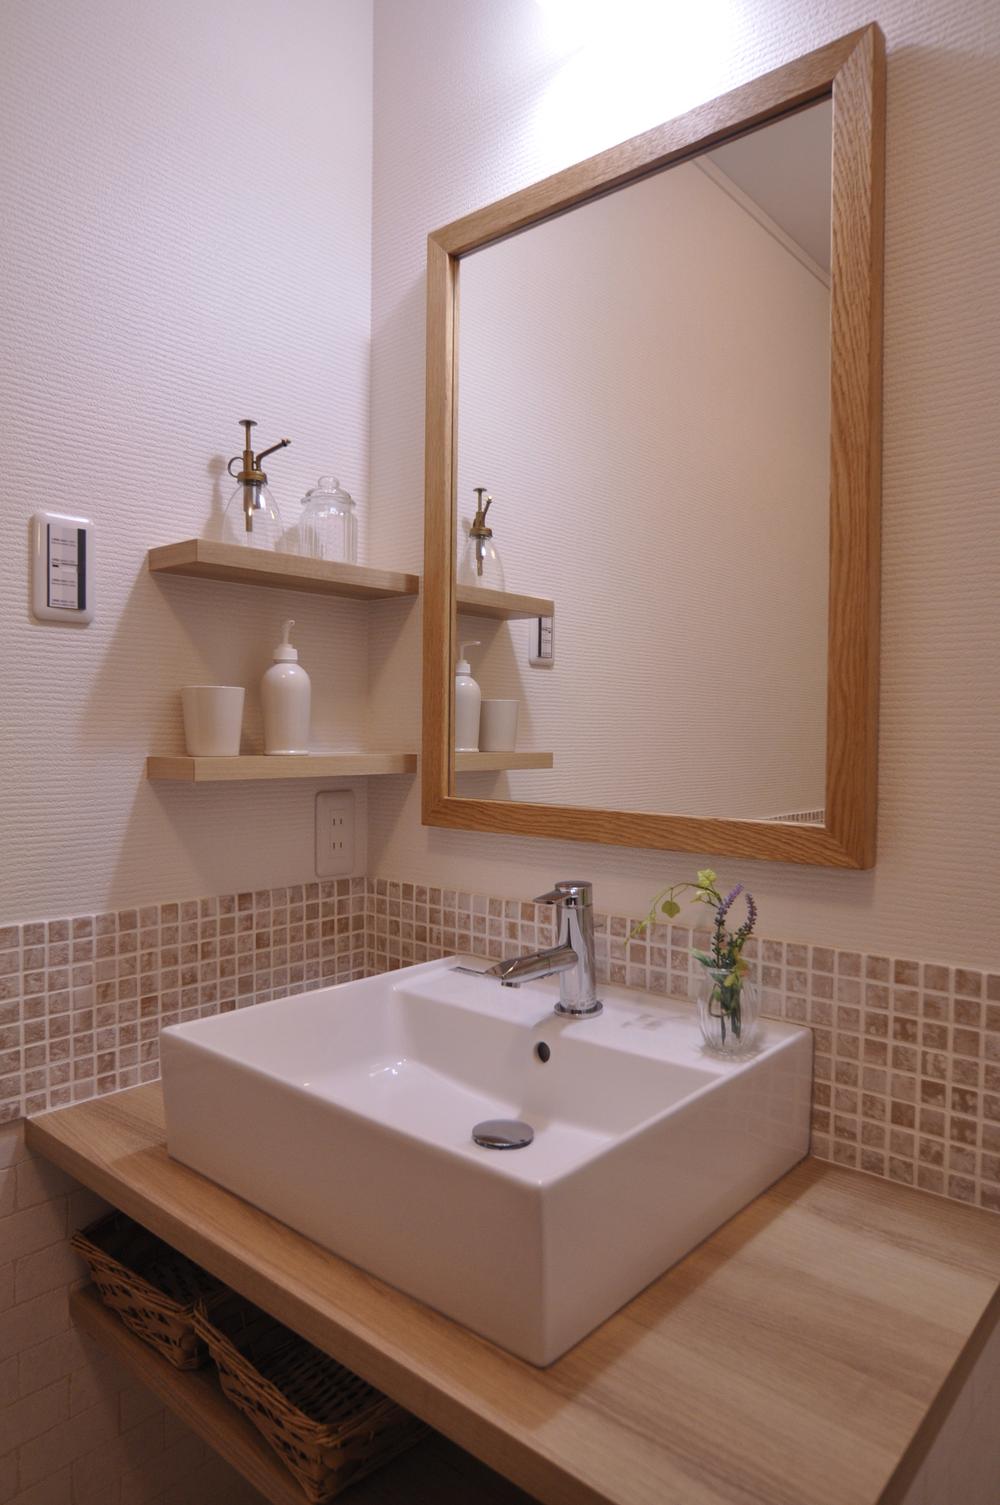 Wash basin, toilet. According to the interior of taste, Tiles and original nice coordinated fixtures basin counter